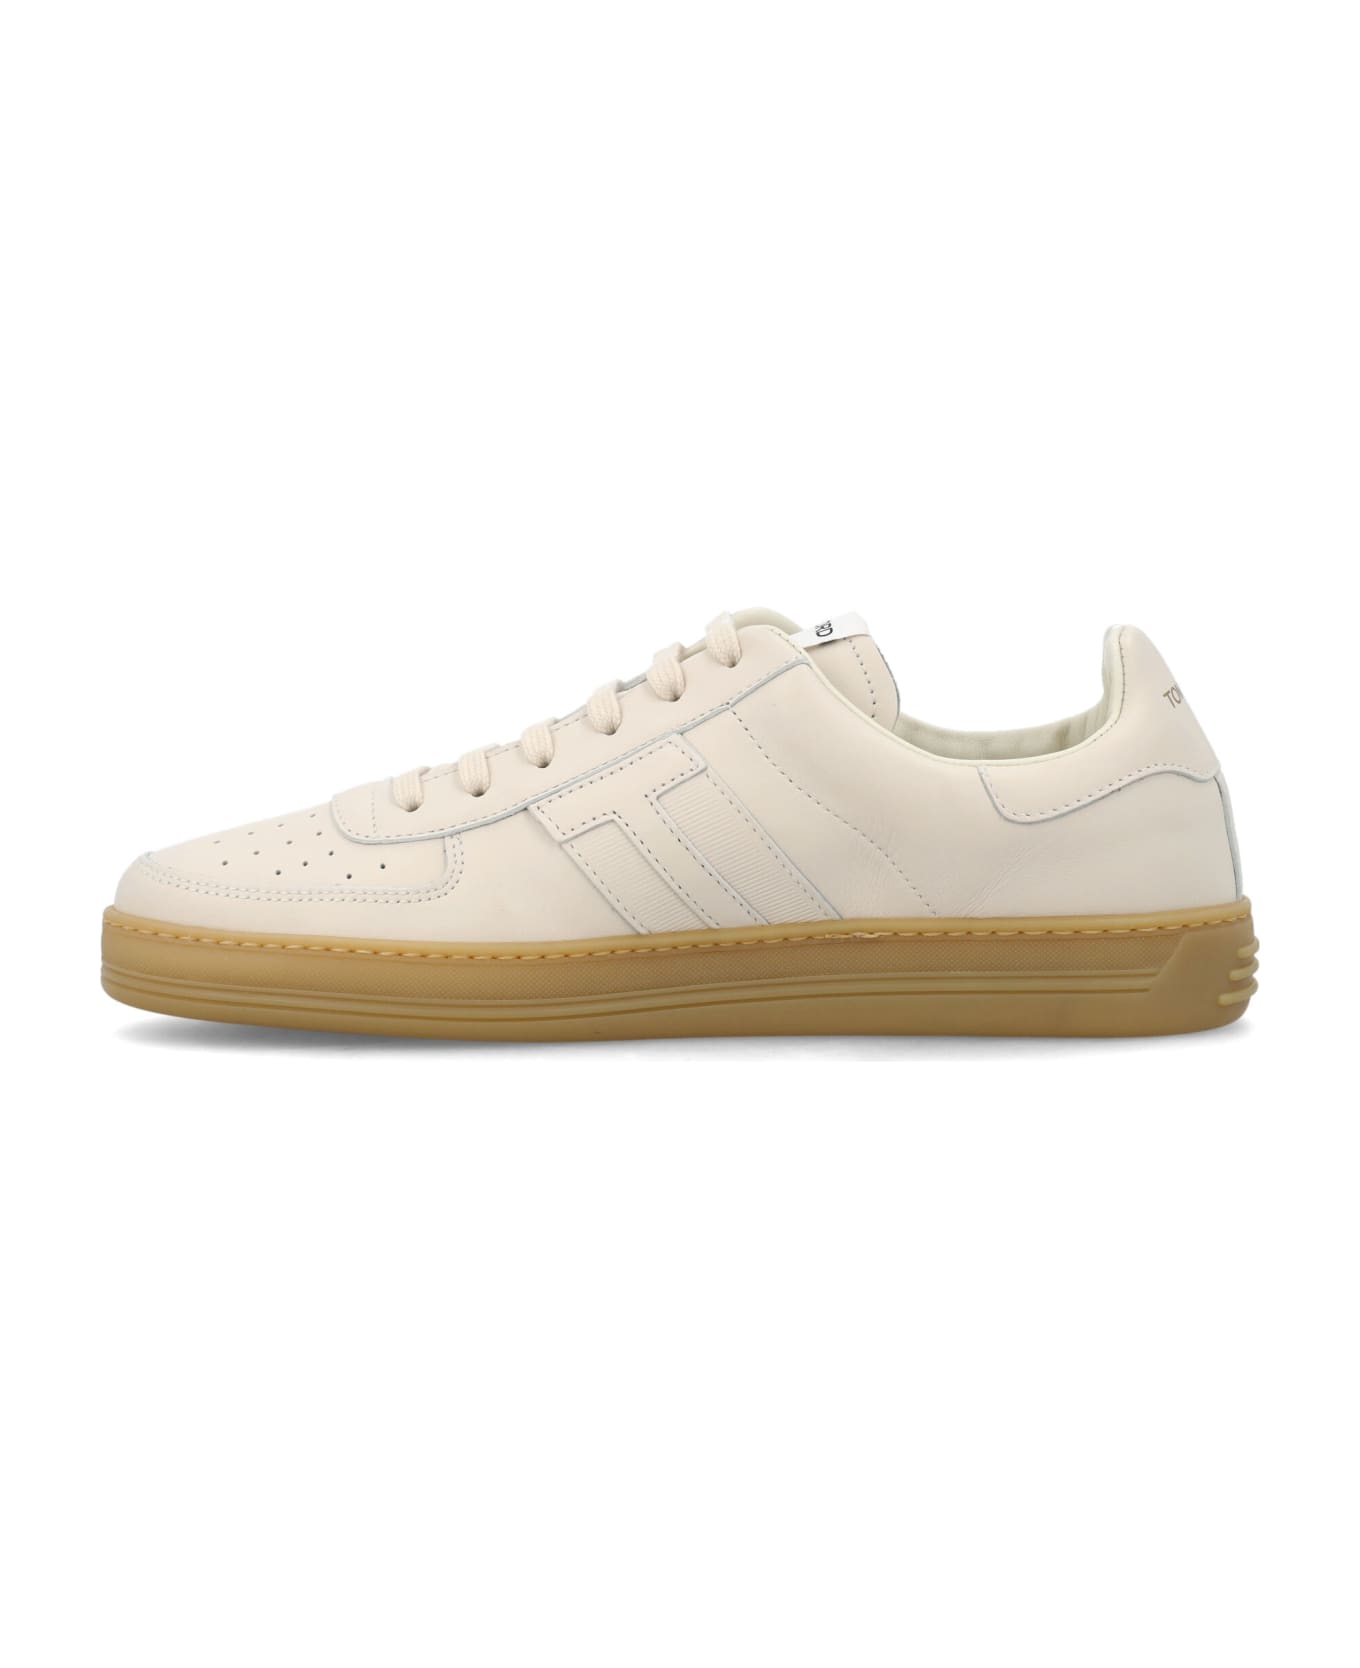 Tom Ford Radcliffe Sneakers - Cream